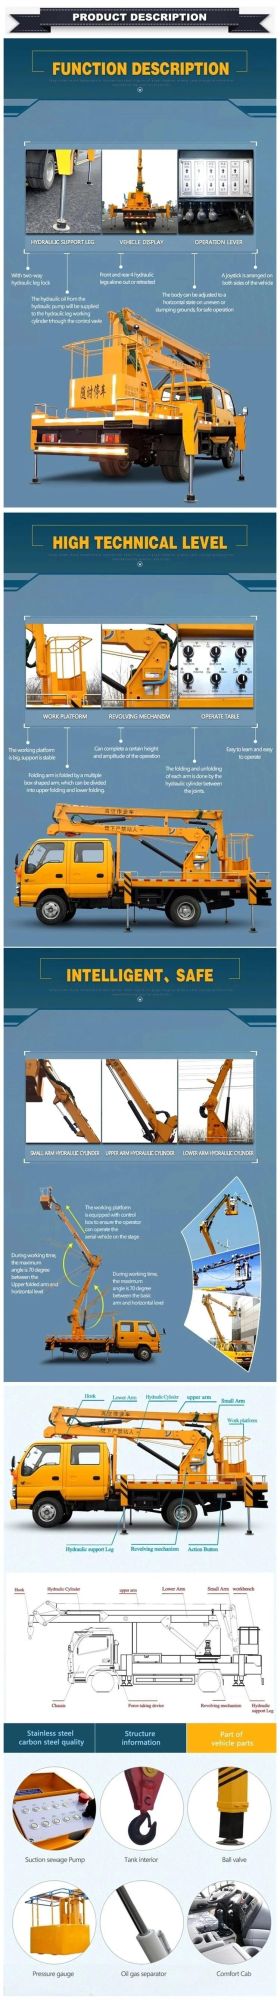 Japan Double Row Cab 12m 14m 16m Aerial Platfrom Lift Truck, Boom Lift Trucks Hot Sale in Philippines